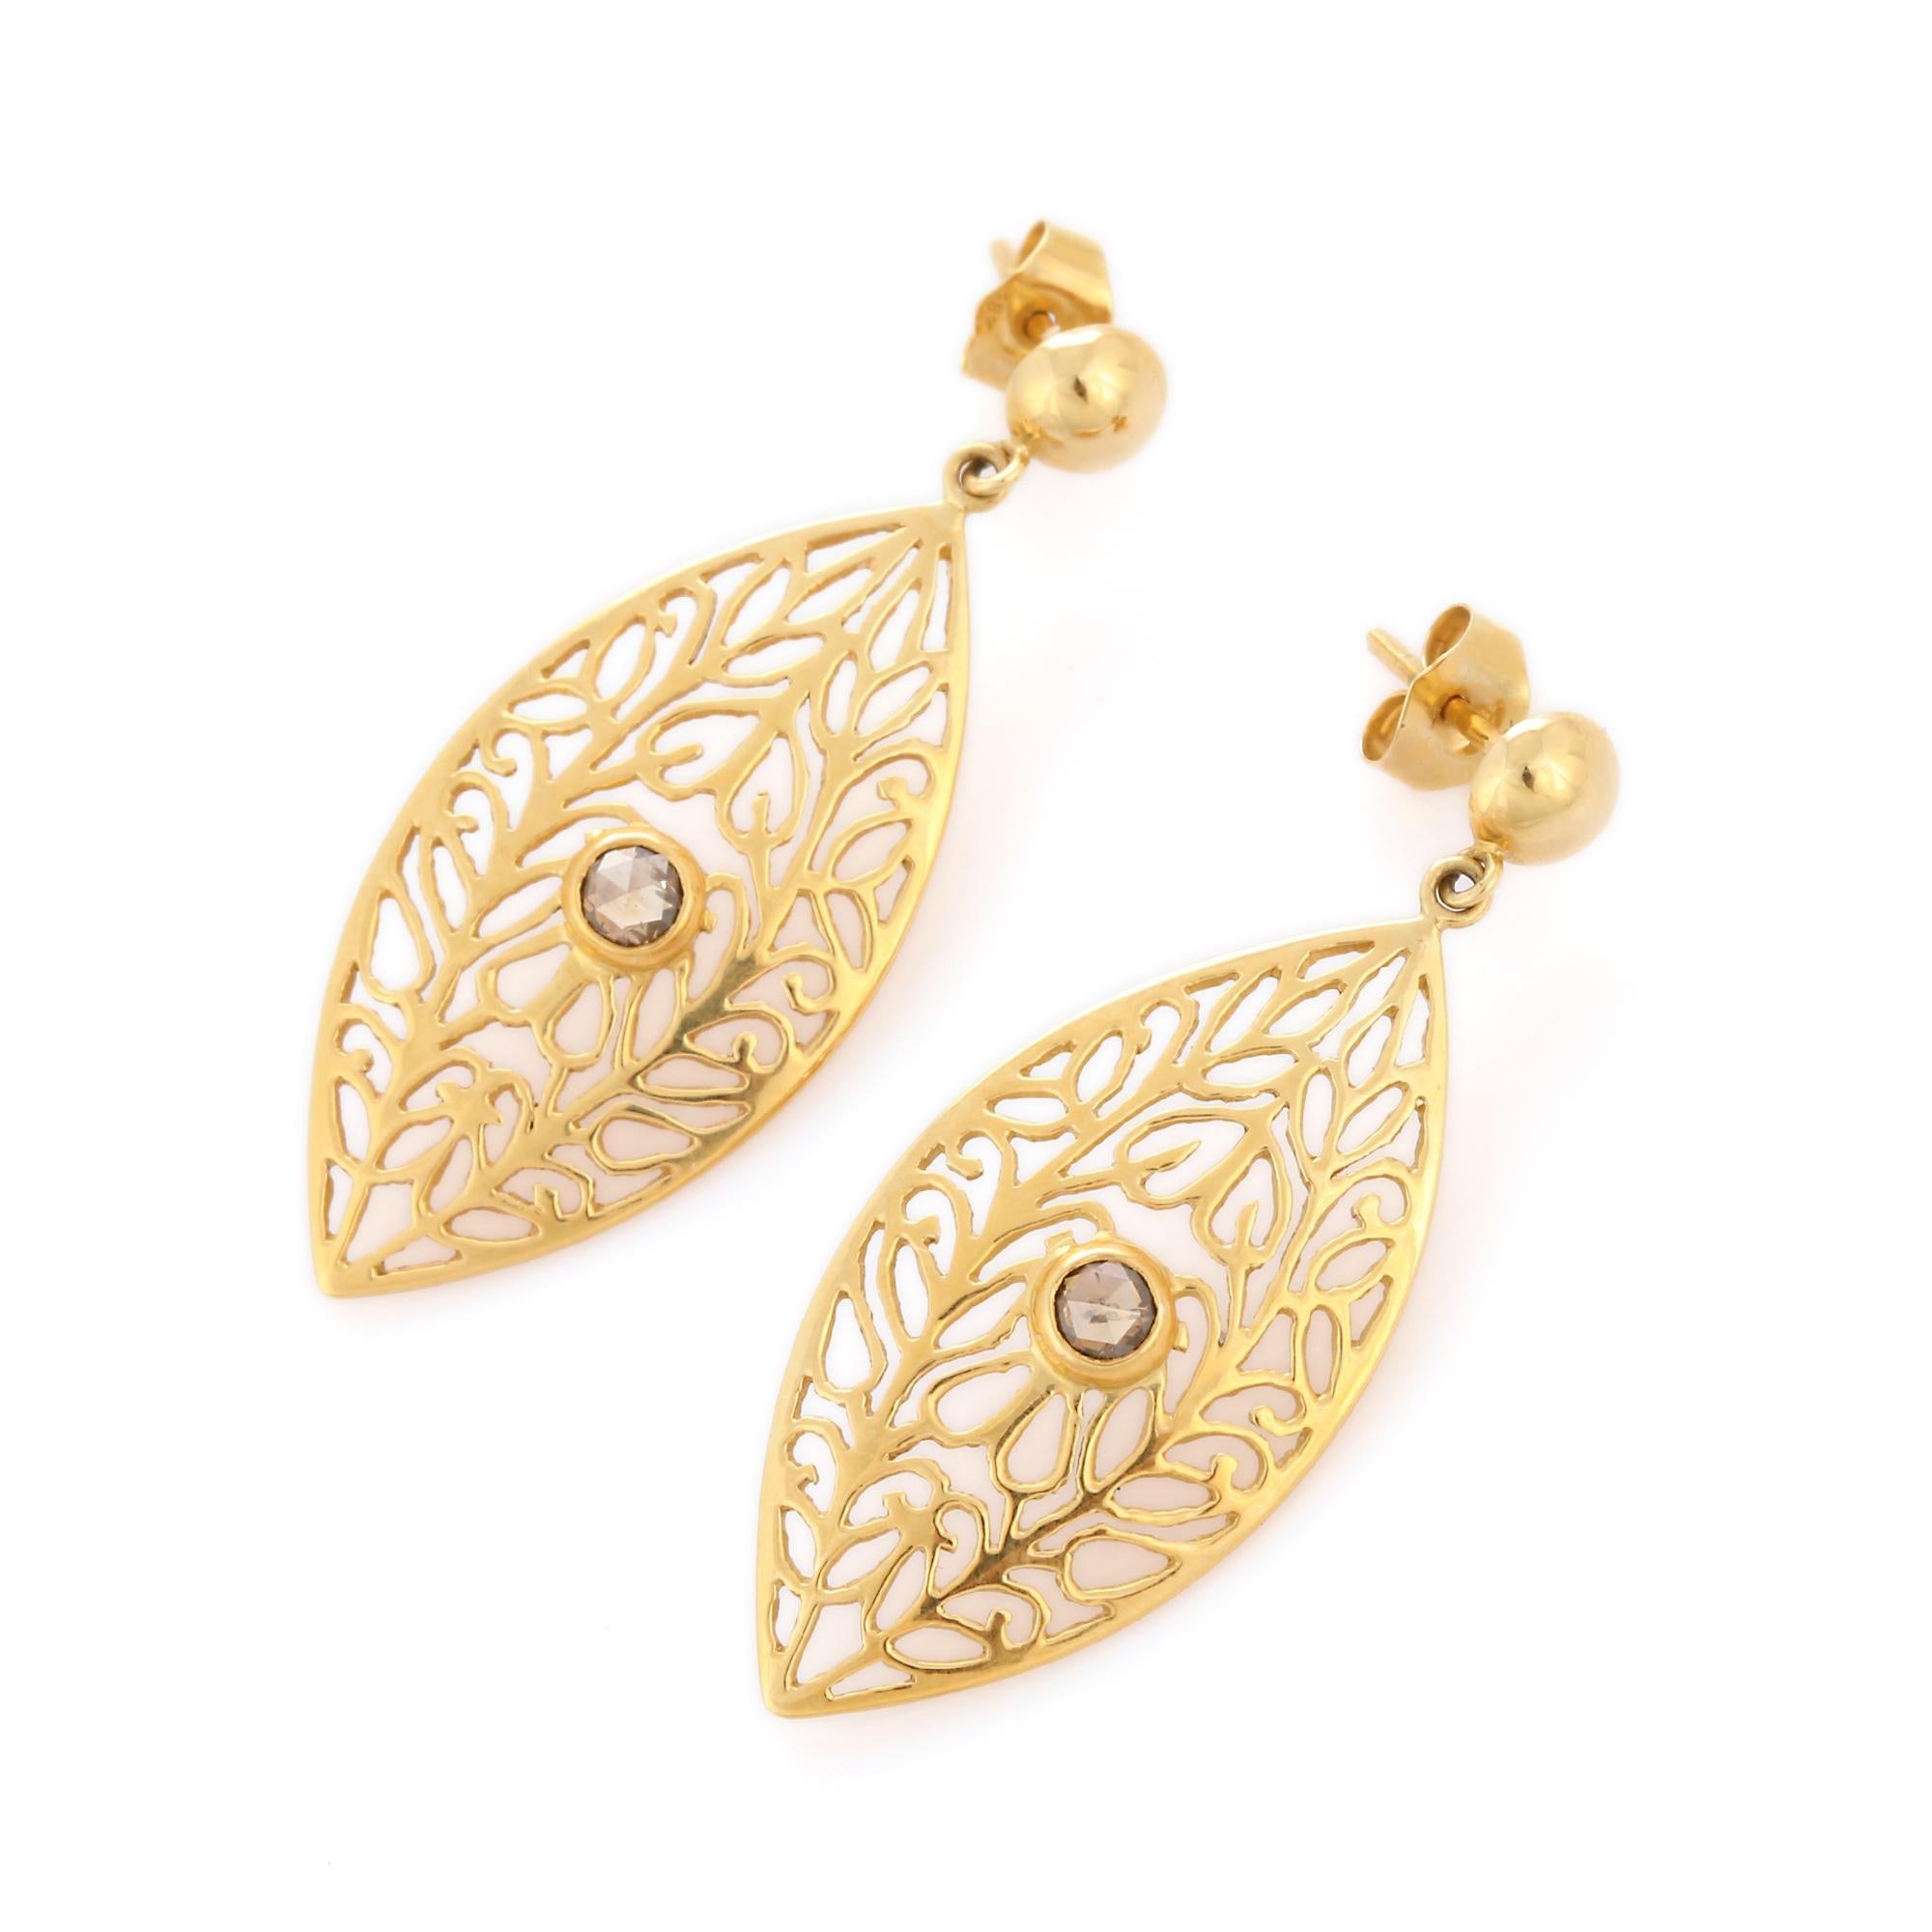 Filigree Leaf Diamond Dangle Earrings in 18K Gold to make a statement with your look. You shall need dangle earrings to make a statement with your look. These earrings create a sparkling, luxurious look featuring round cut diamond.
April birthstone